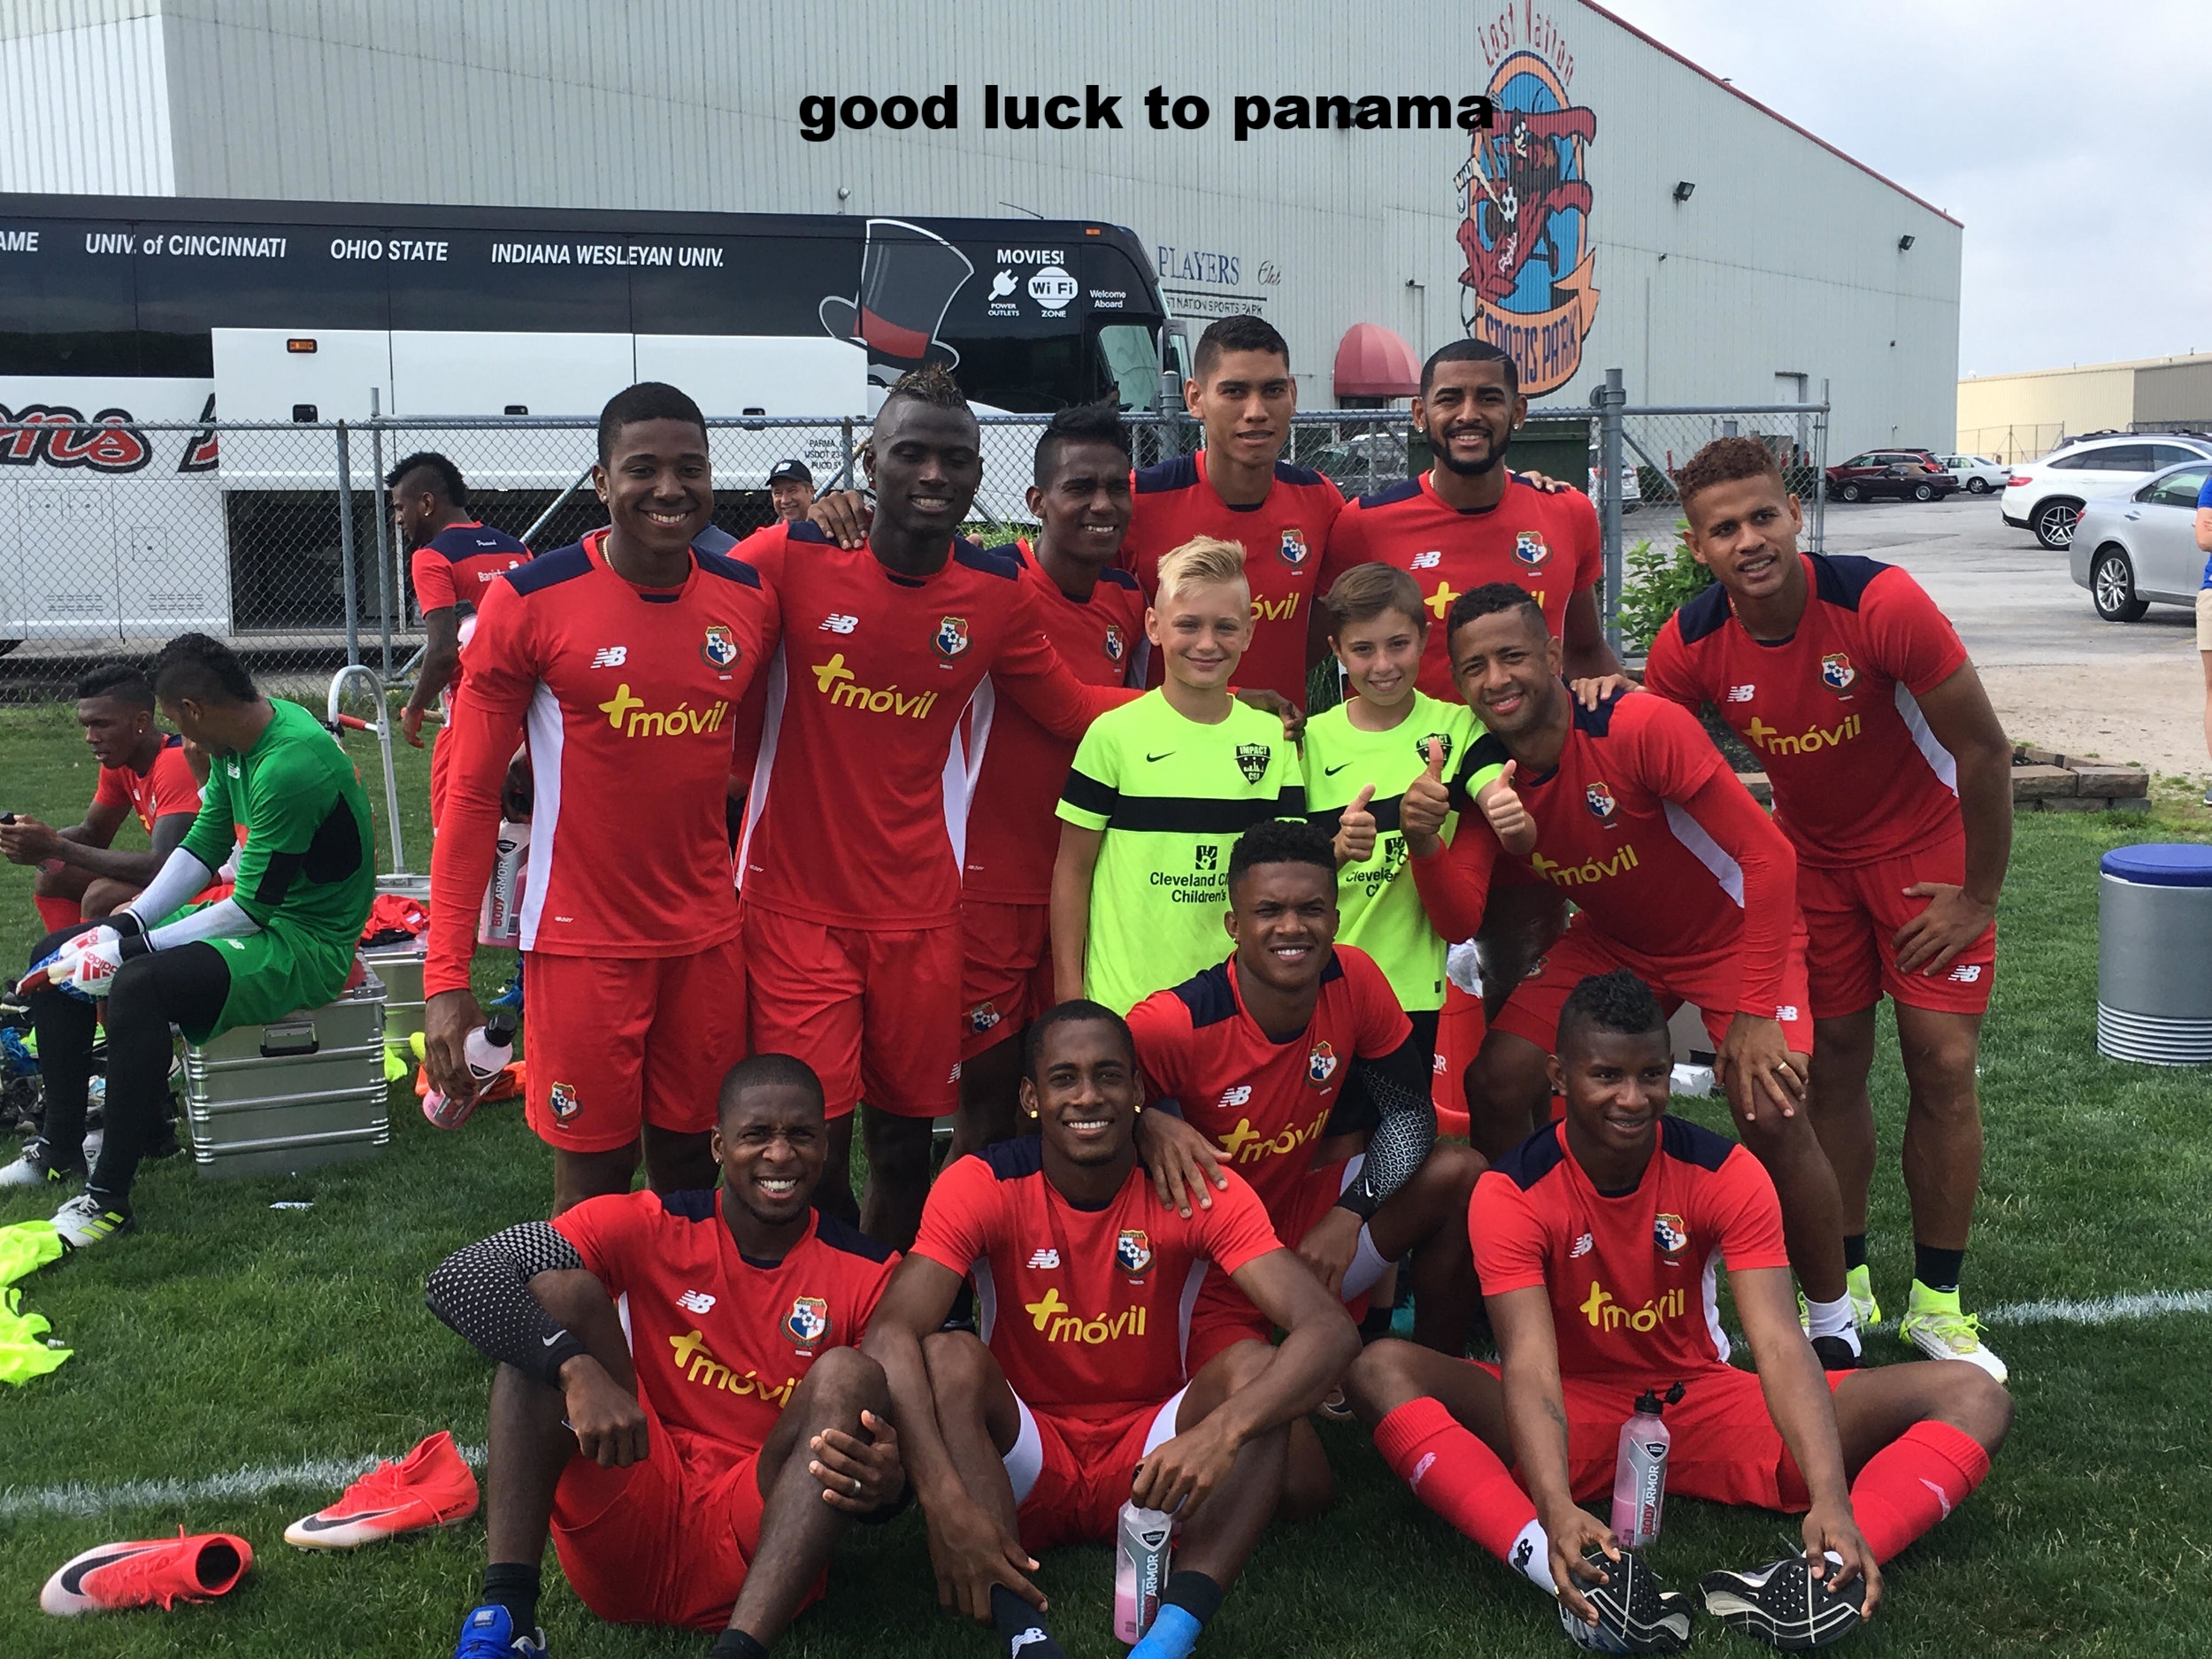 Good luck to Panama at 2018 World cup